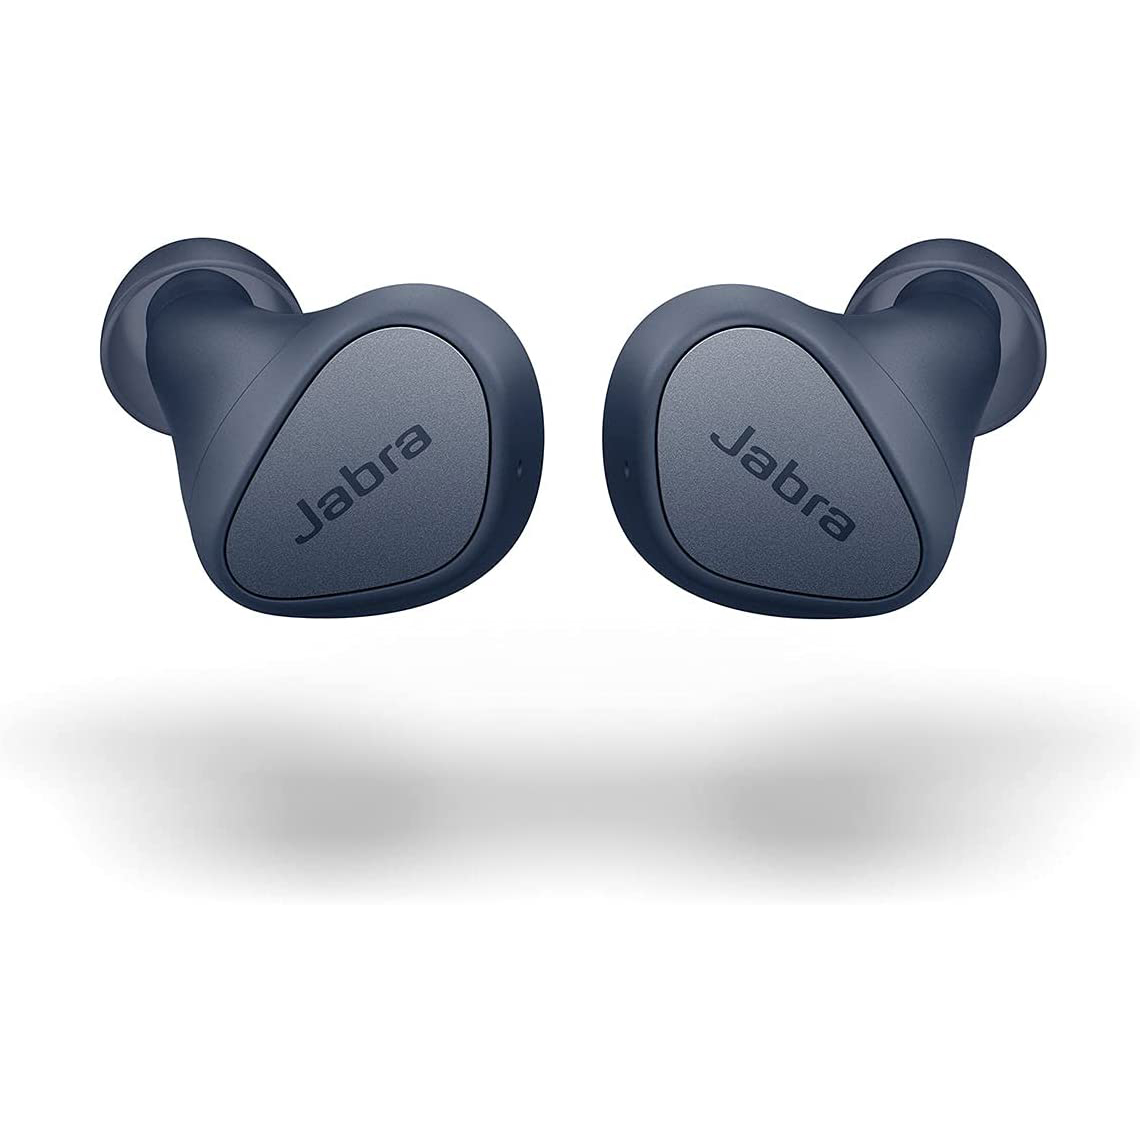 The Jabra Elite 3 noise canceling true wireless earbuds in blue against a white background.